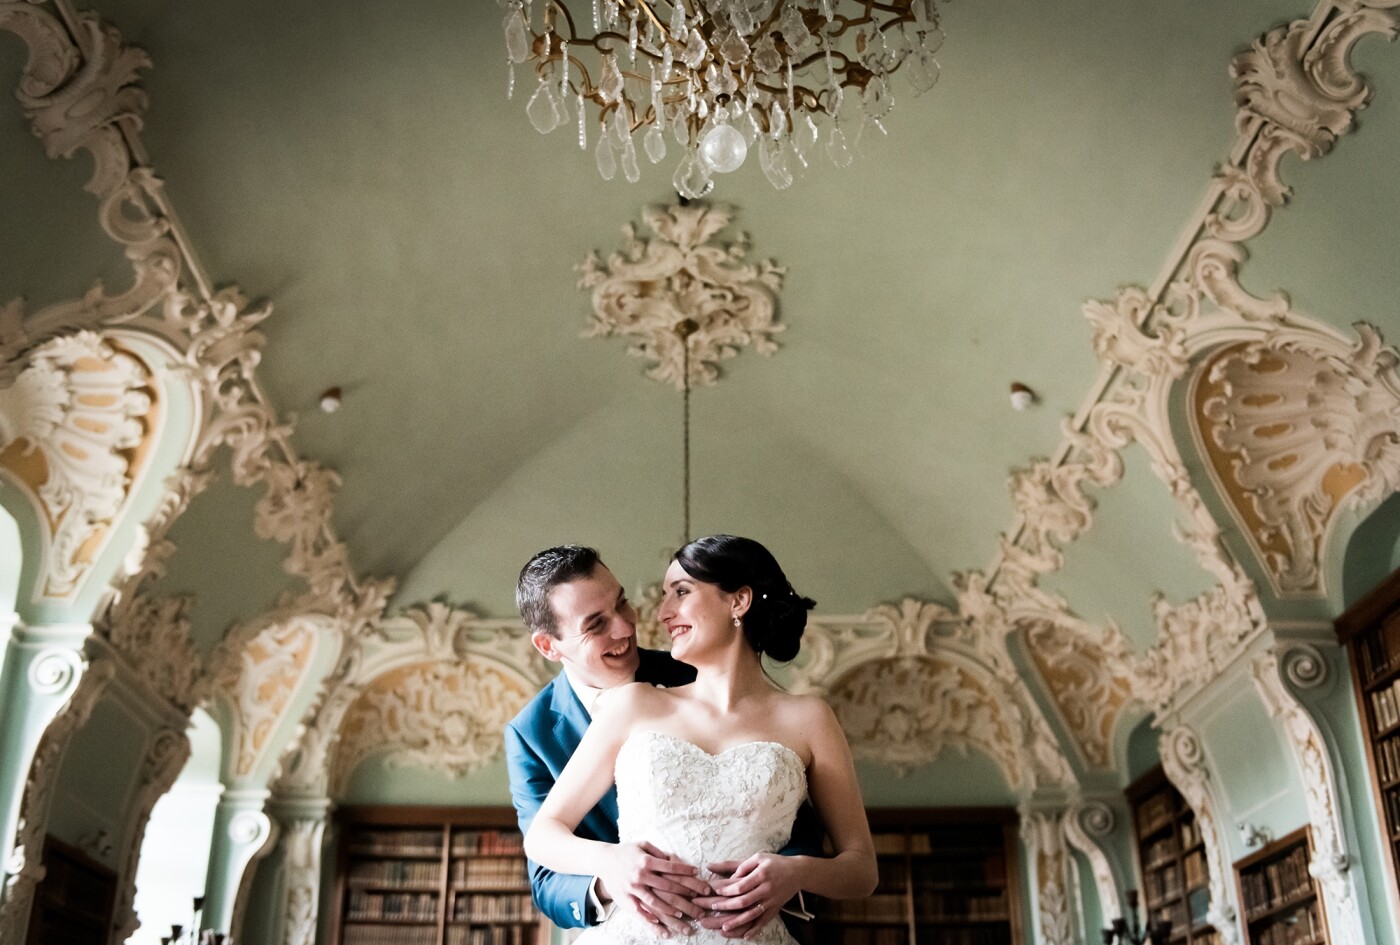 This lovely picture was taken during a cold winter wedding in the Rococo library of the Rolduc Abby in Kerkrade, Zuid Limburg. I especially love the green colors of this room and the pretty ceiling.